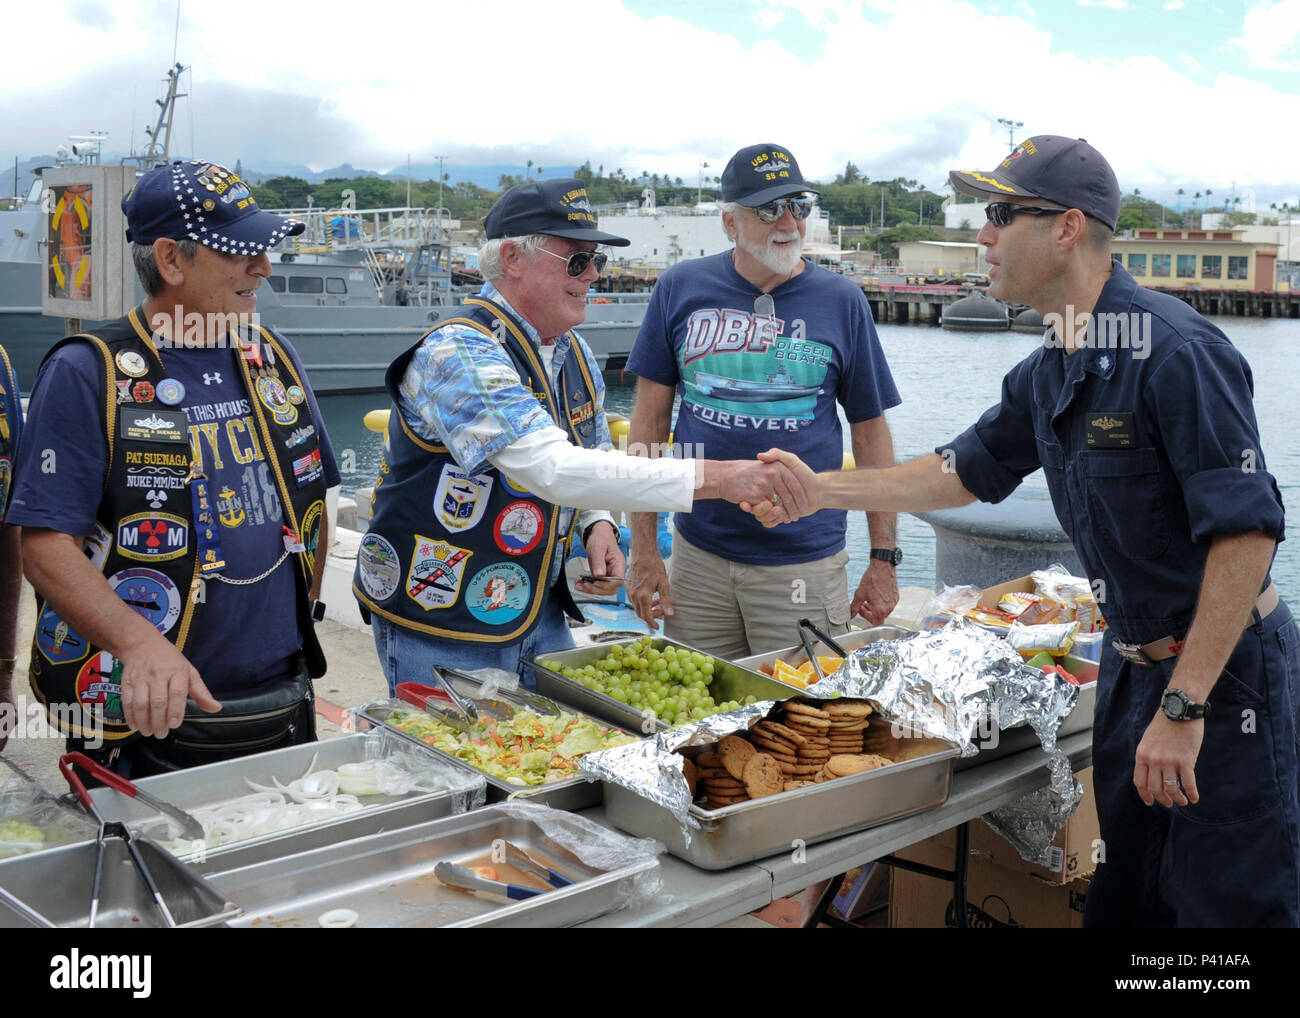 160606-N-KV911-058  PEARL HARBOR (June 6, 2016) Tim Seipp, a member of the Submarine Veterans Bowfin Base, bids Cmdr. Scott McGinnis, commanding officer of the Los Angeles-class fast-attack submarine USS Houston (SSN 713), farewell. Houston is en route to Puget Sound Naval Shipyard in Bremerton, Washington, to commence its inactivation process and decommissioning after 33 years of service. (U.S. Navy photo by Mass Communication Specialist 2nd Class Shaun Griffin/Released) Stock Photo